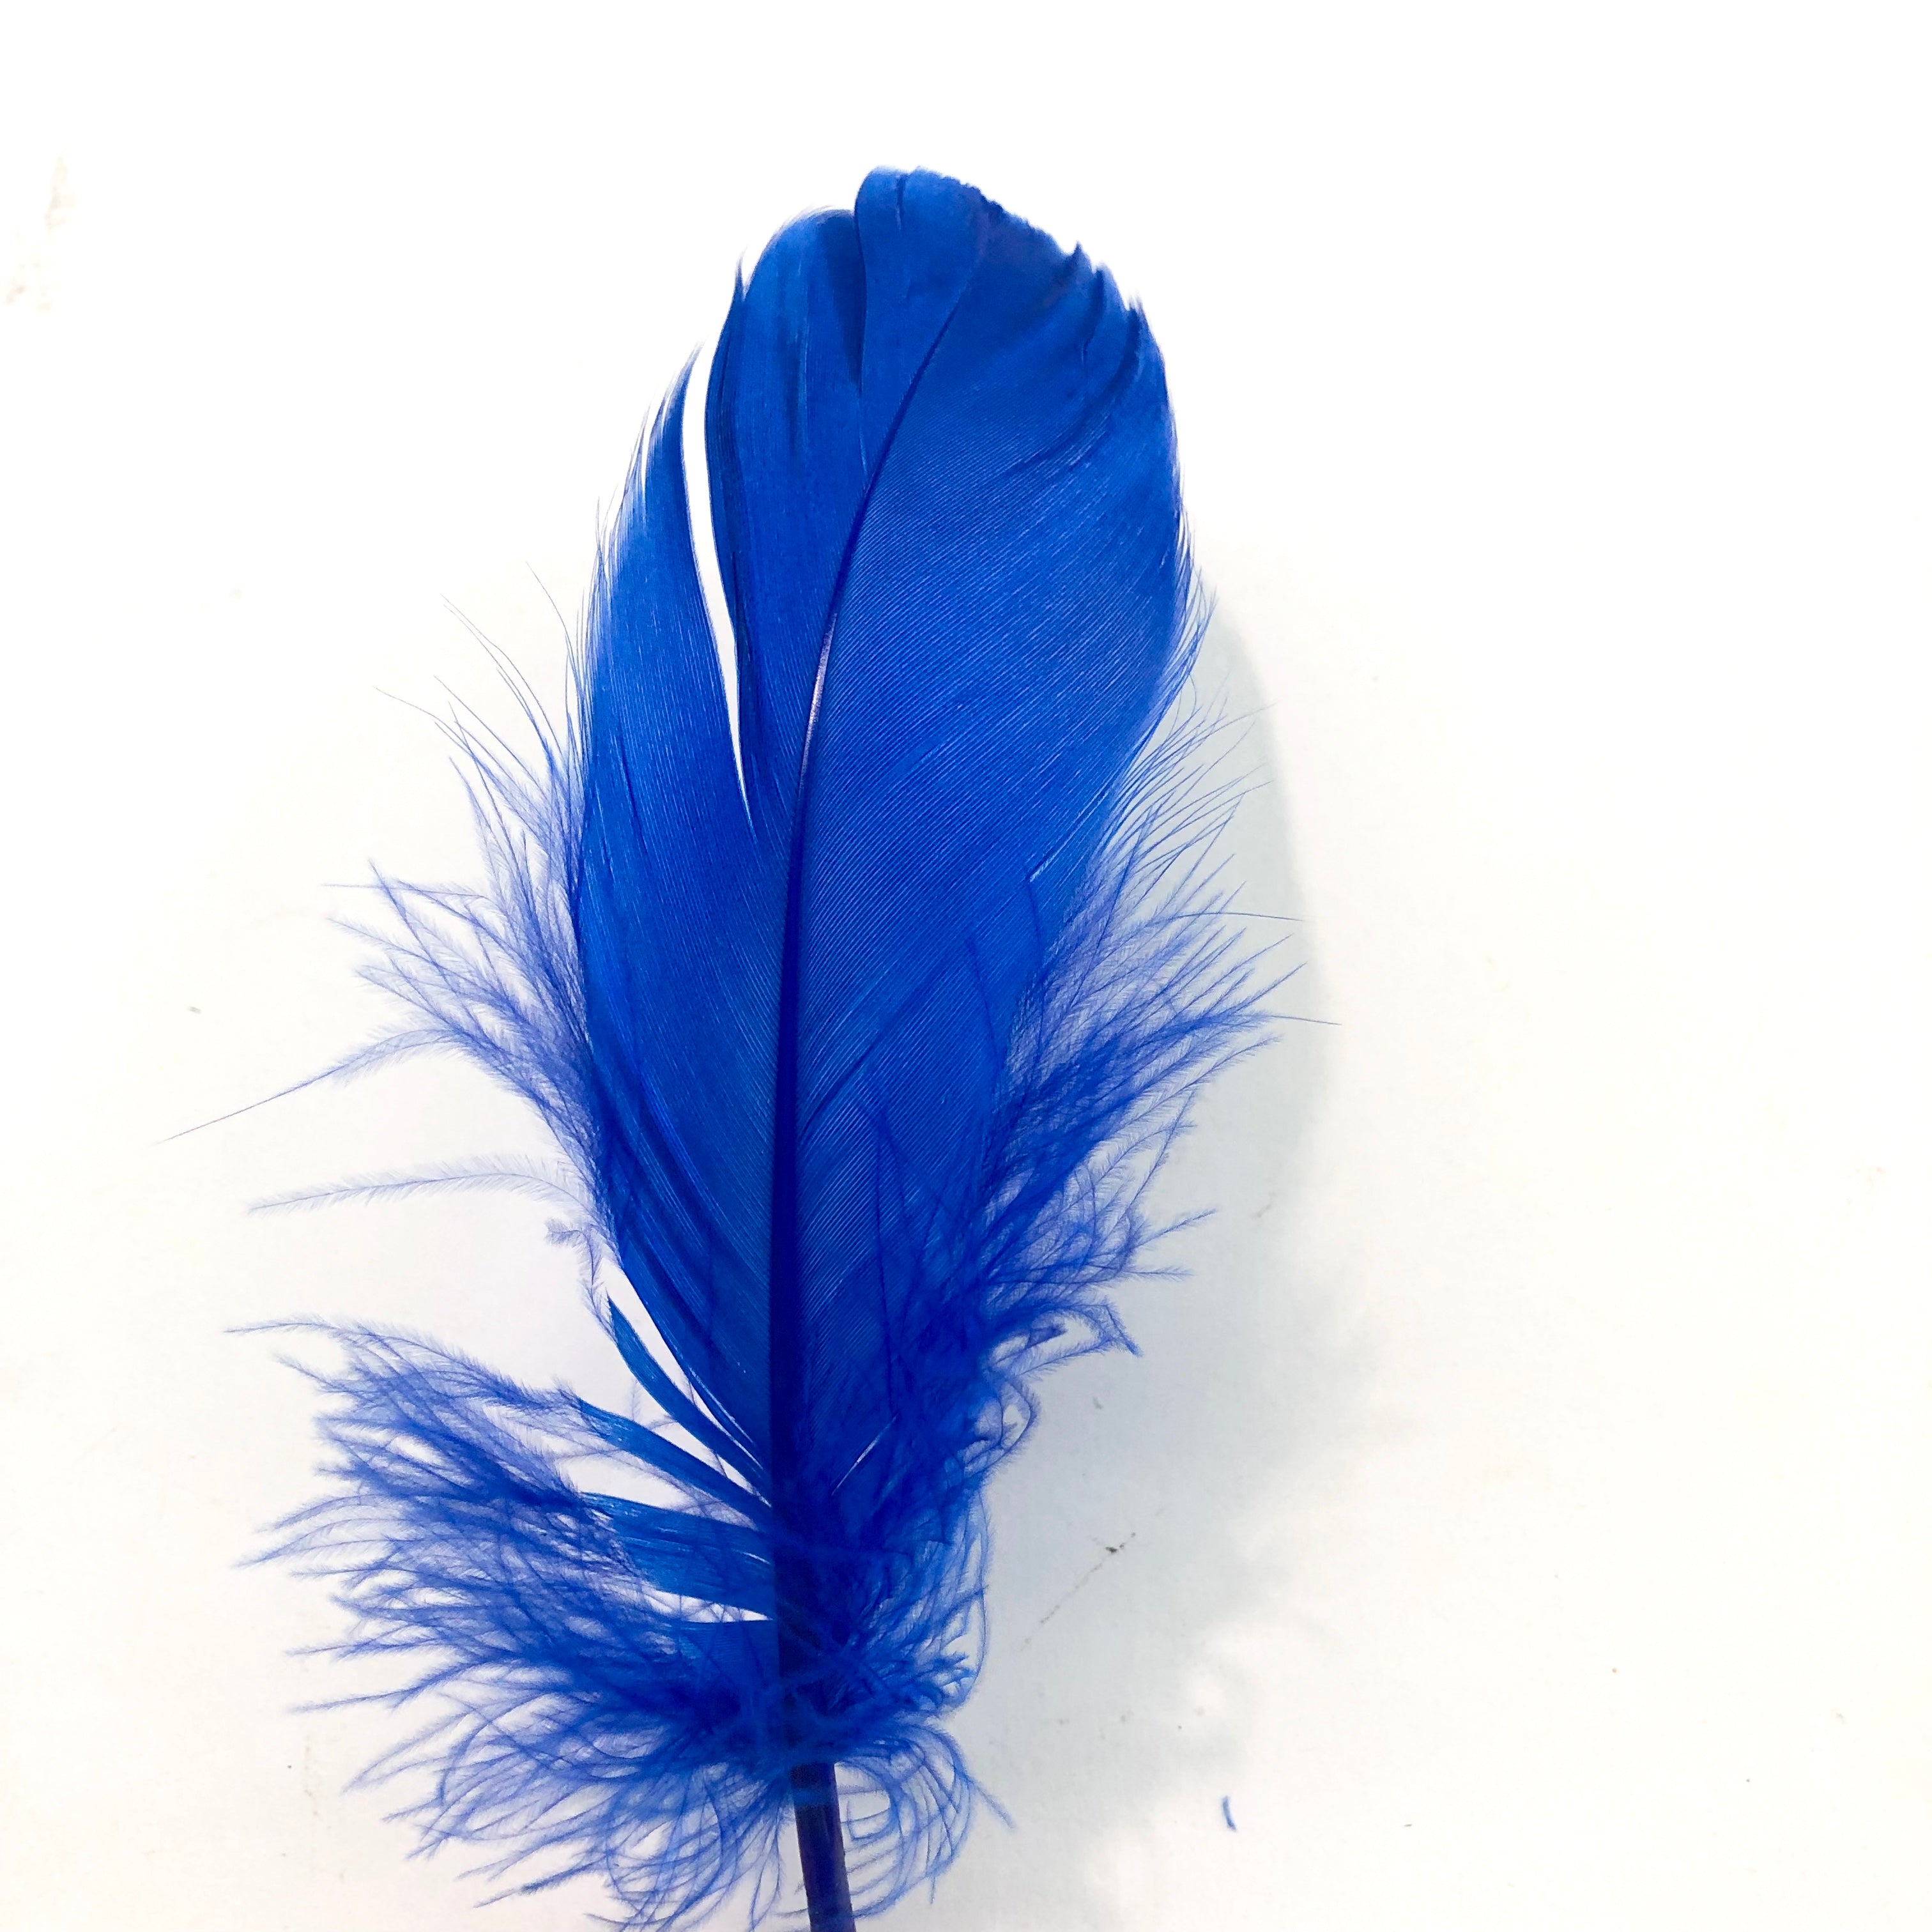 Goose Nagoire Feathers 10 grams - Royal Blue